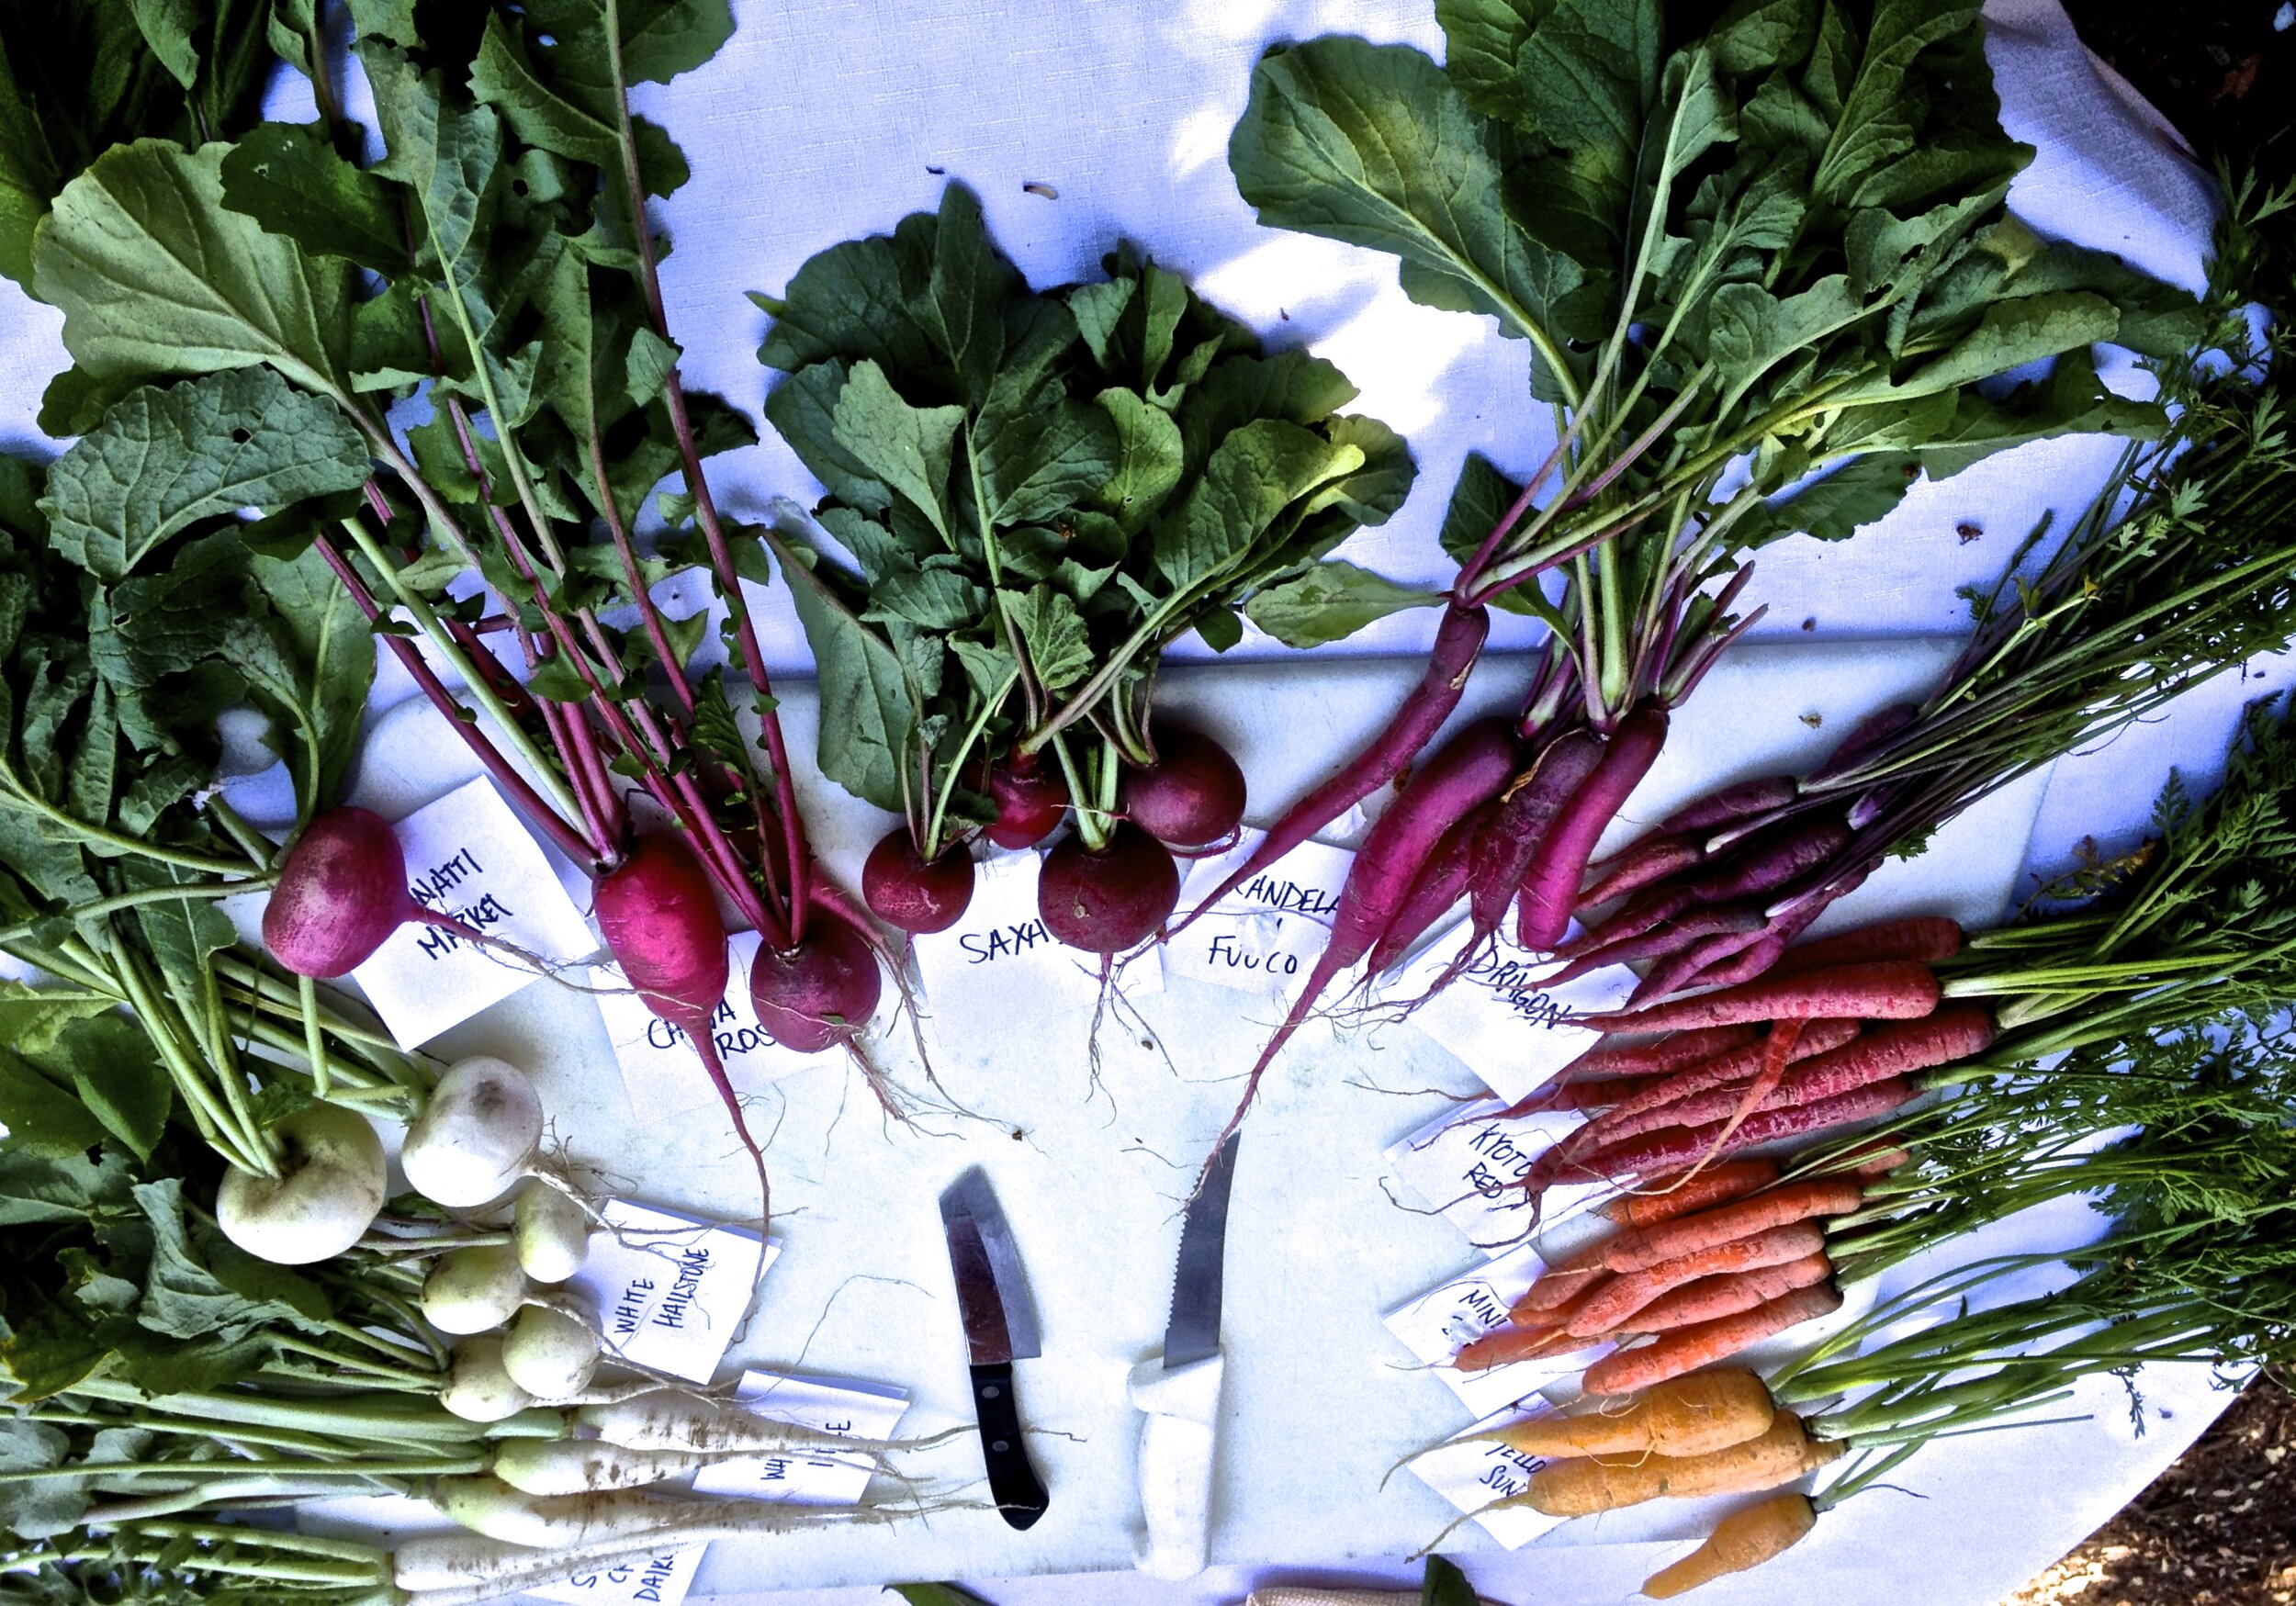 Carrots in all colors: Madison is a champion of fresh, local produce